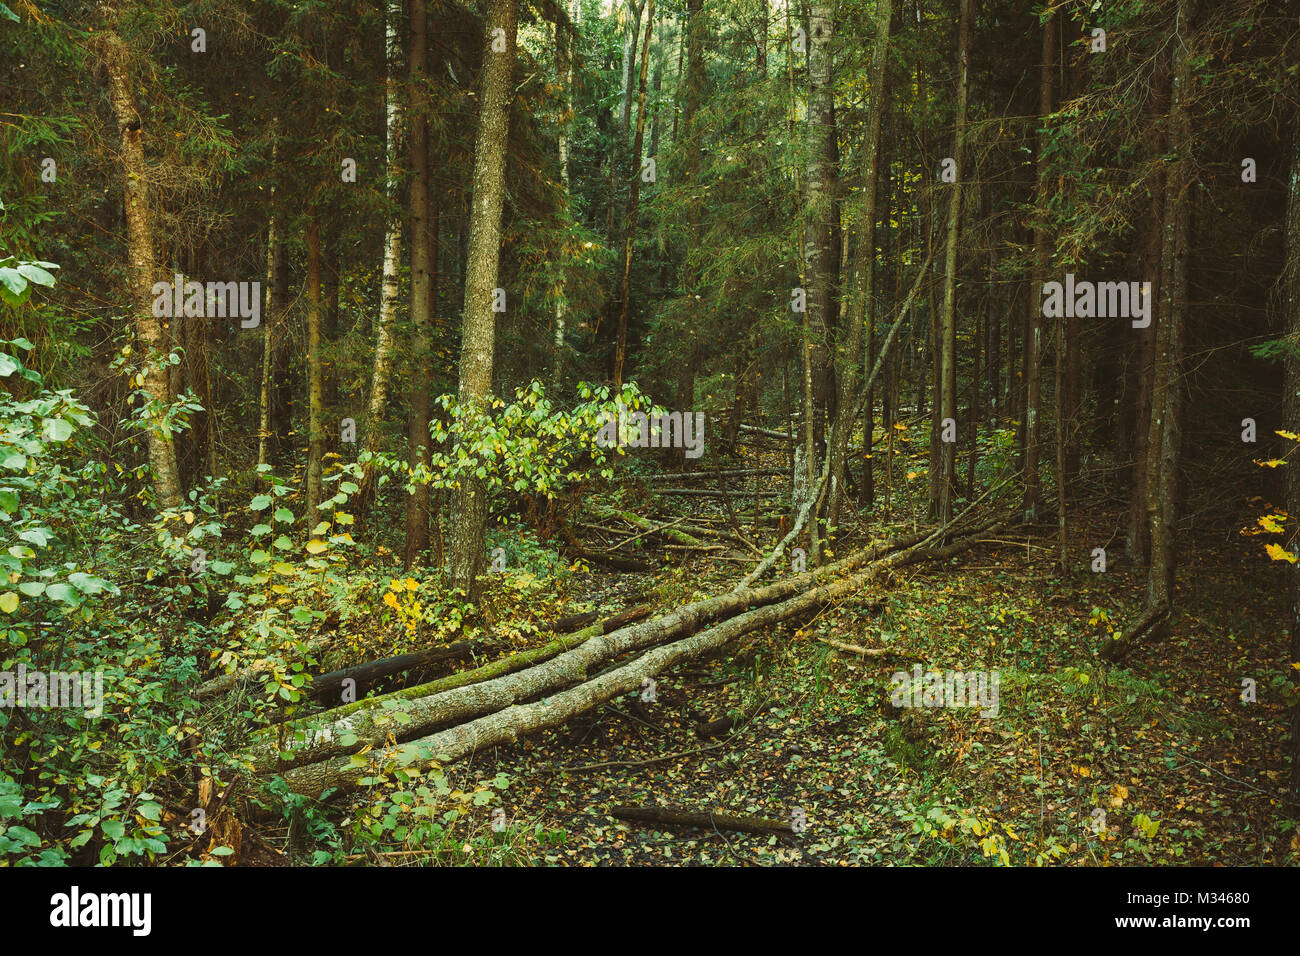 Wild Autumn Forest. Fallen Trees In Green Coniferous Forest Reserve Stock Photo